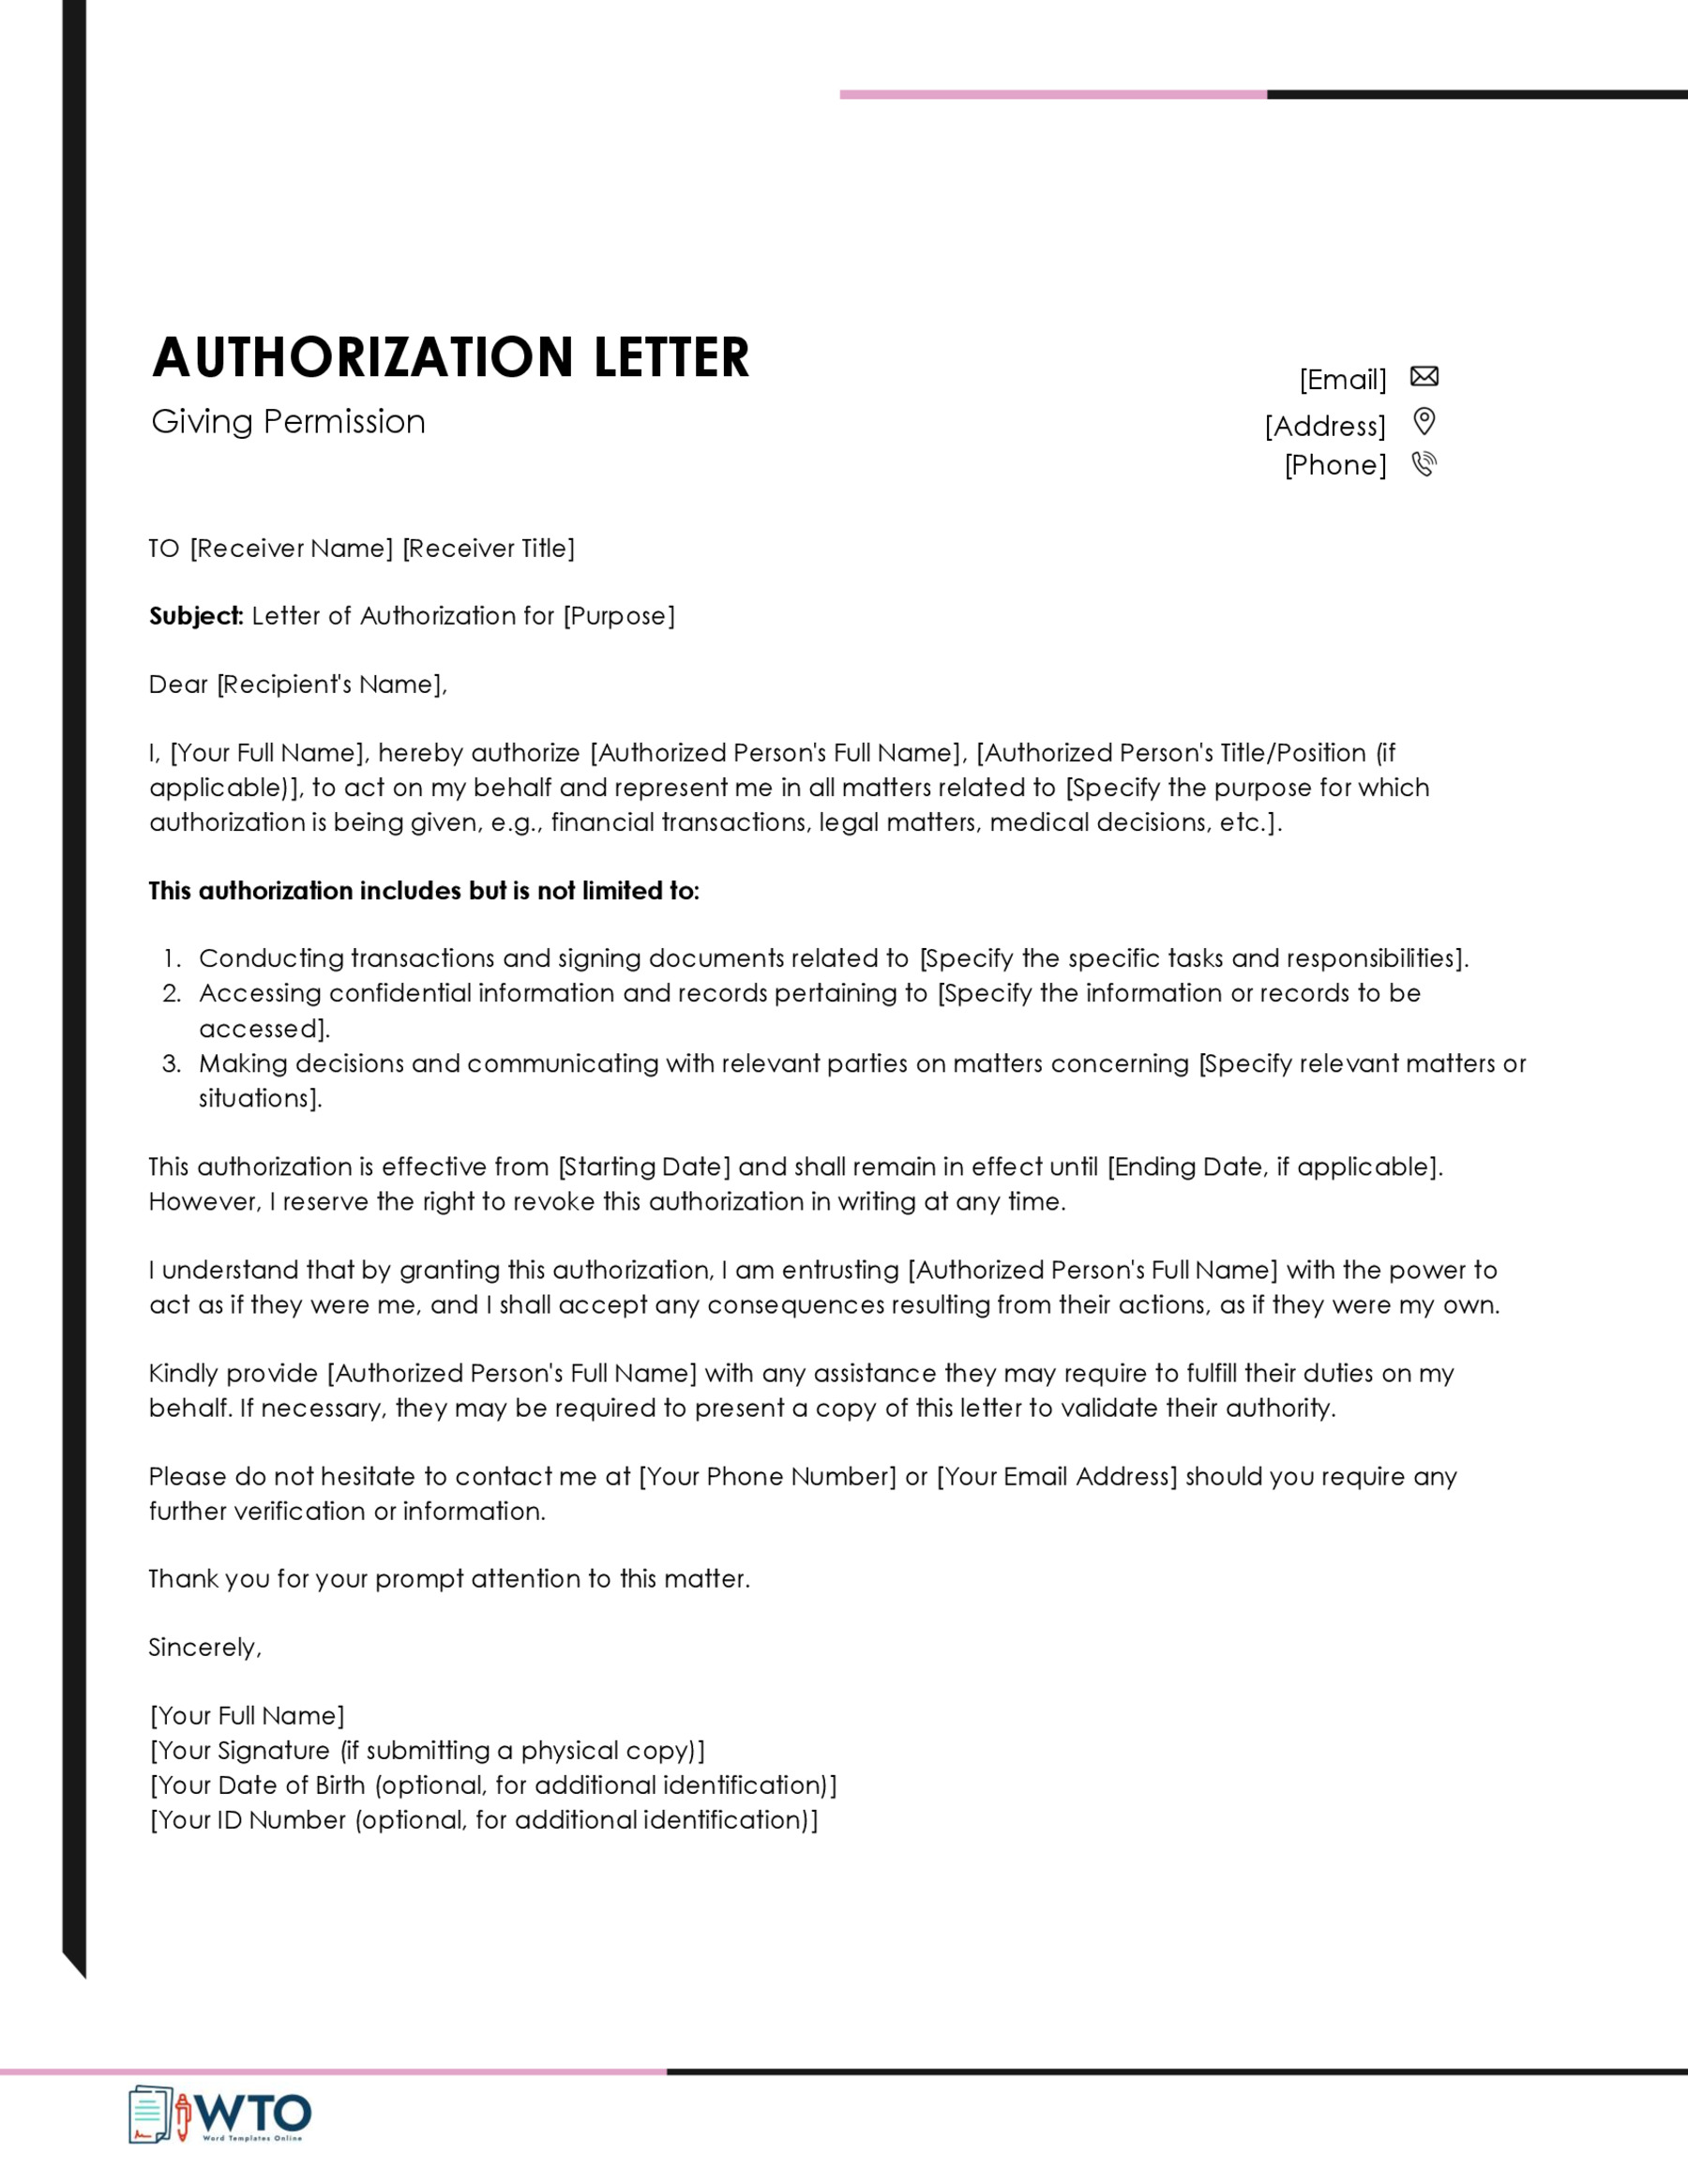 52 Best Authorization Letter Samples (Free Templates)